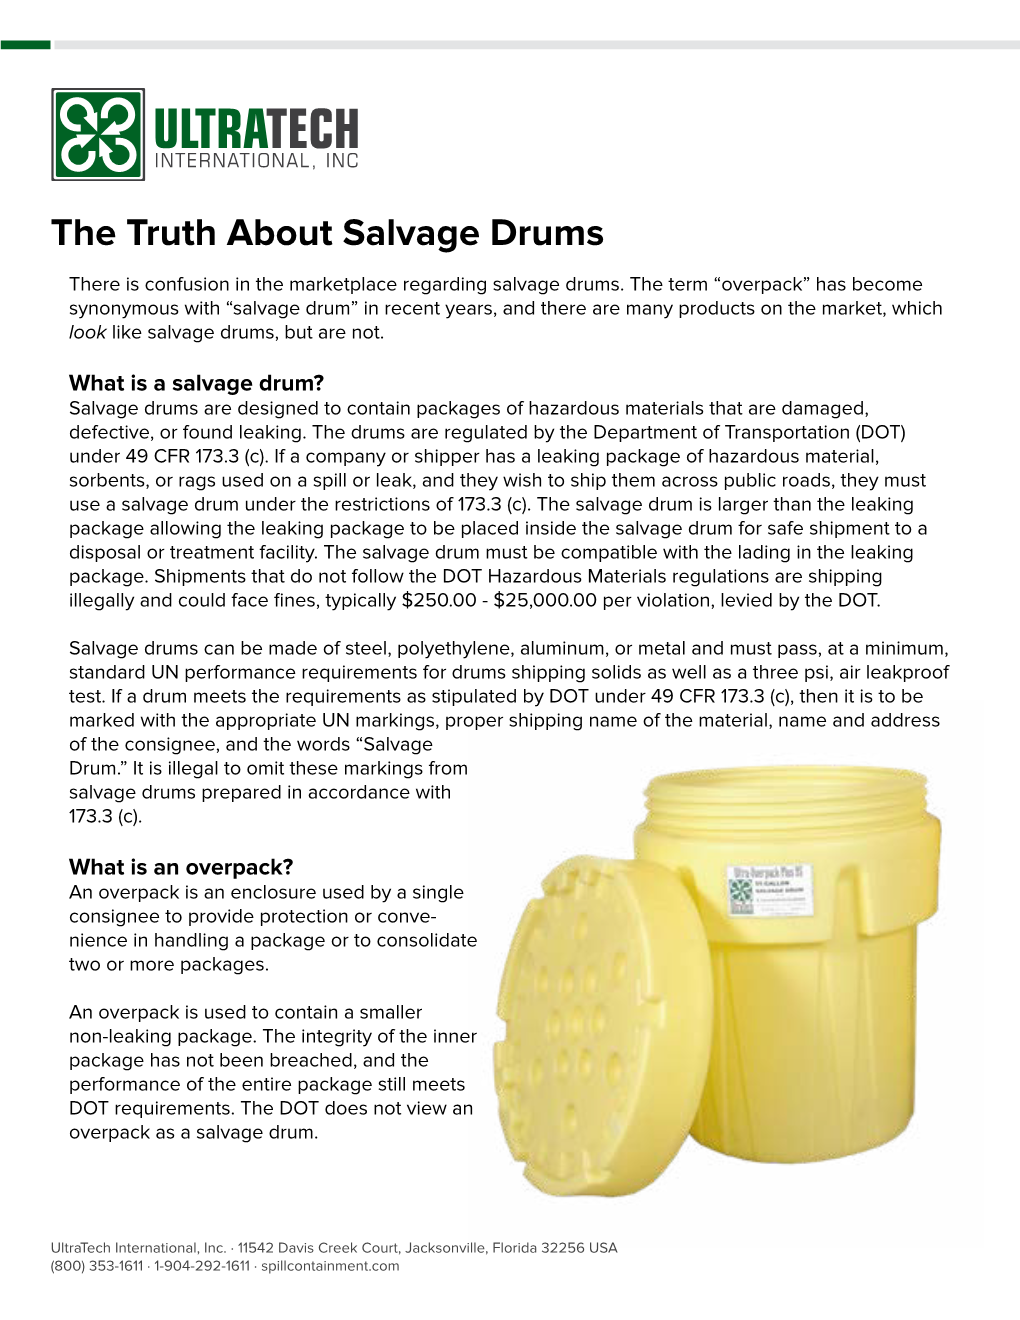 The Truth About Salvage Drums There Is Confusion in the Marketplace Regarding Salvage Drums